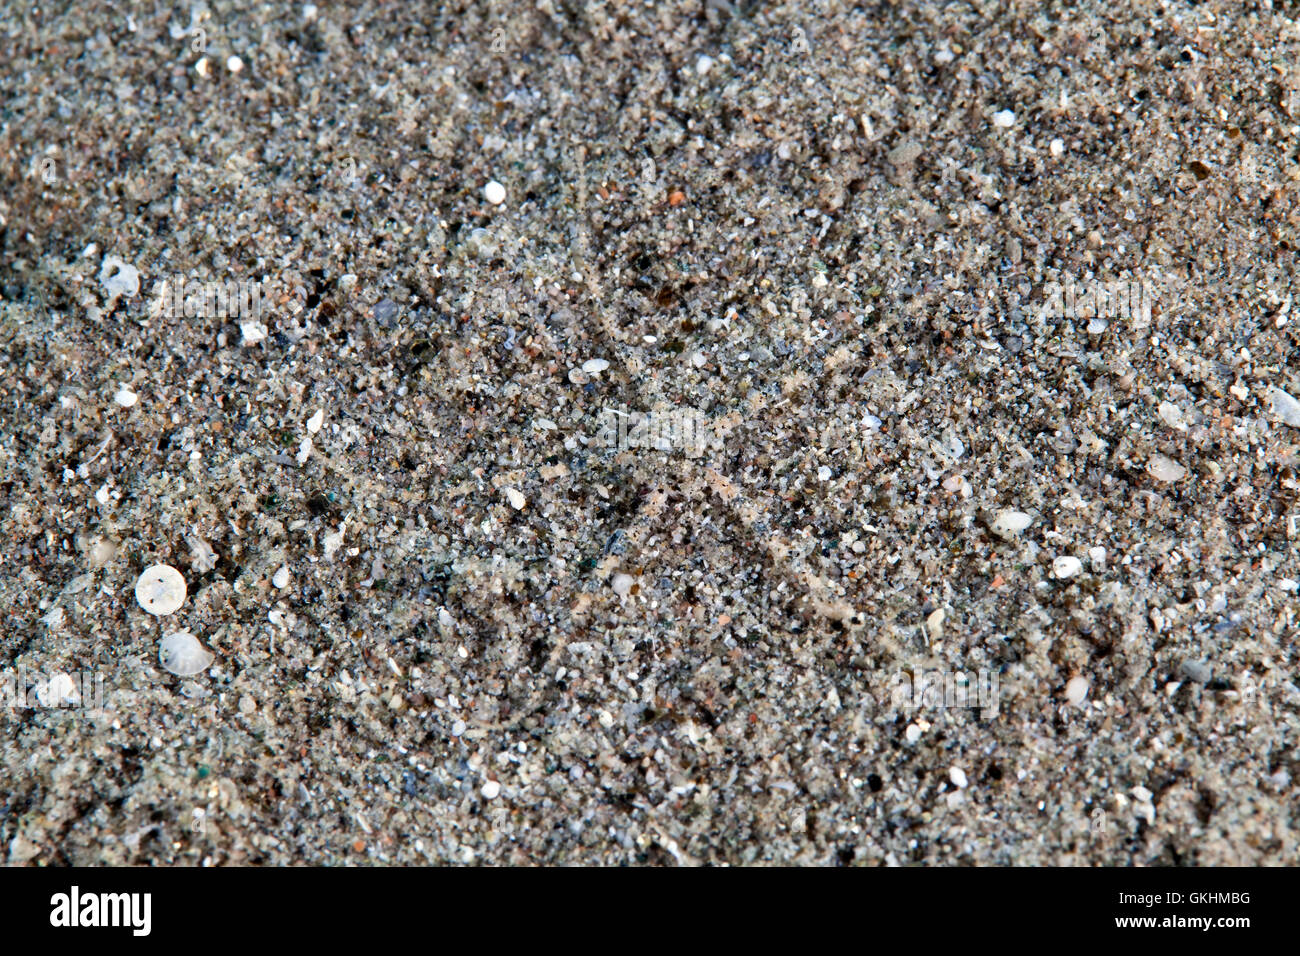 Serpent or brittle star (ophiuroidea gray) Stock Photo